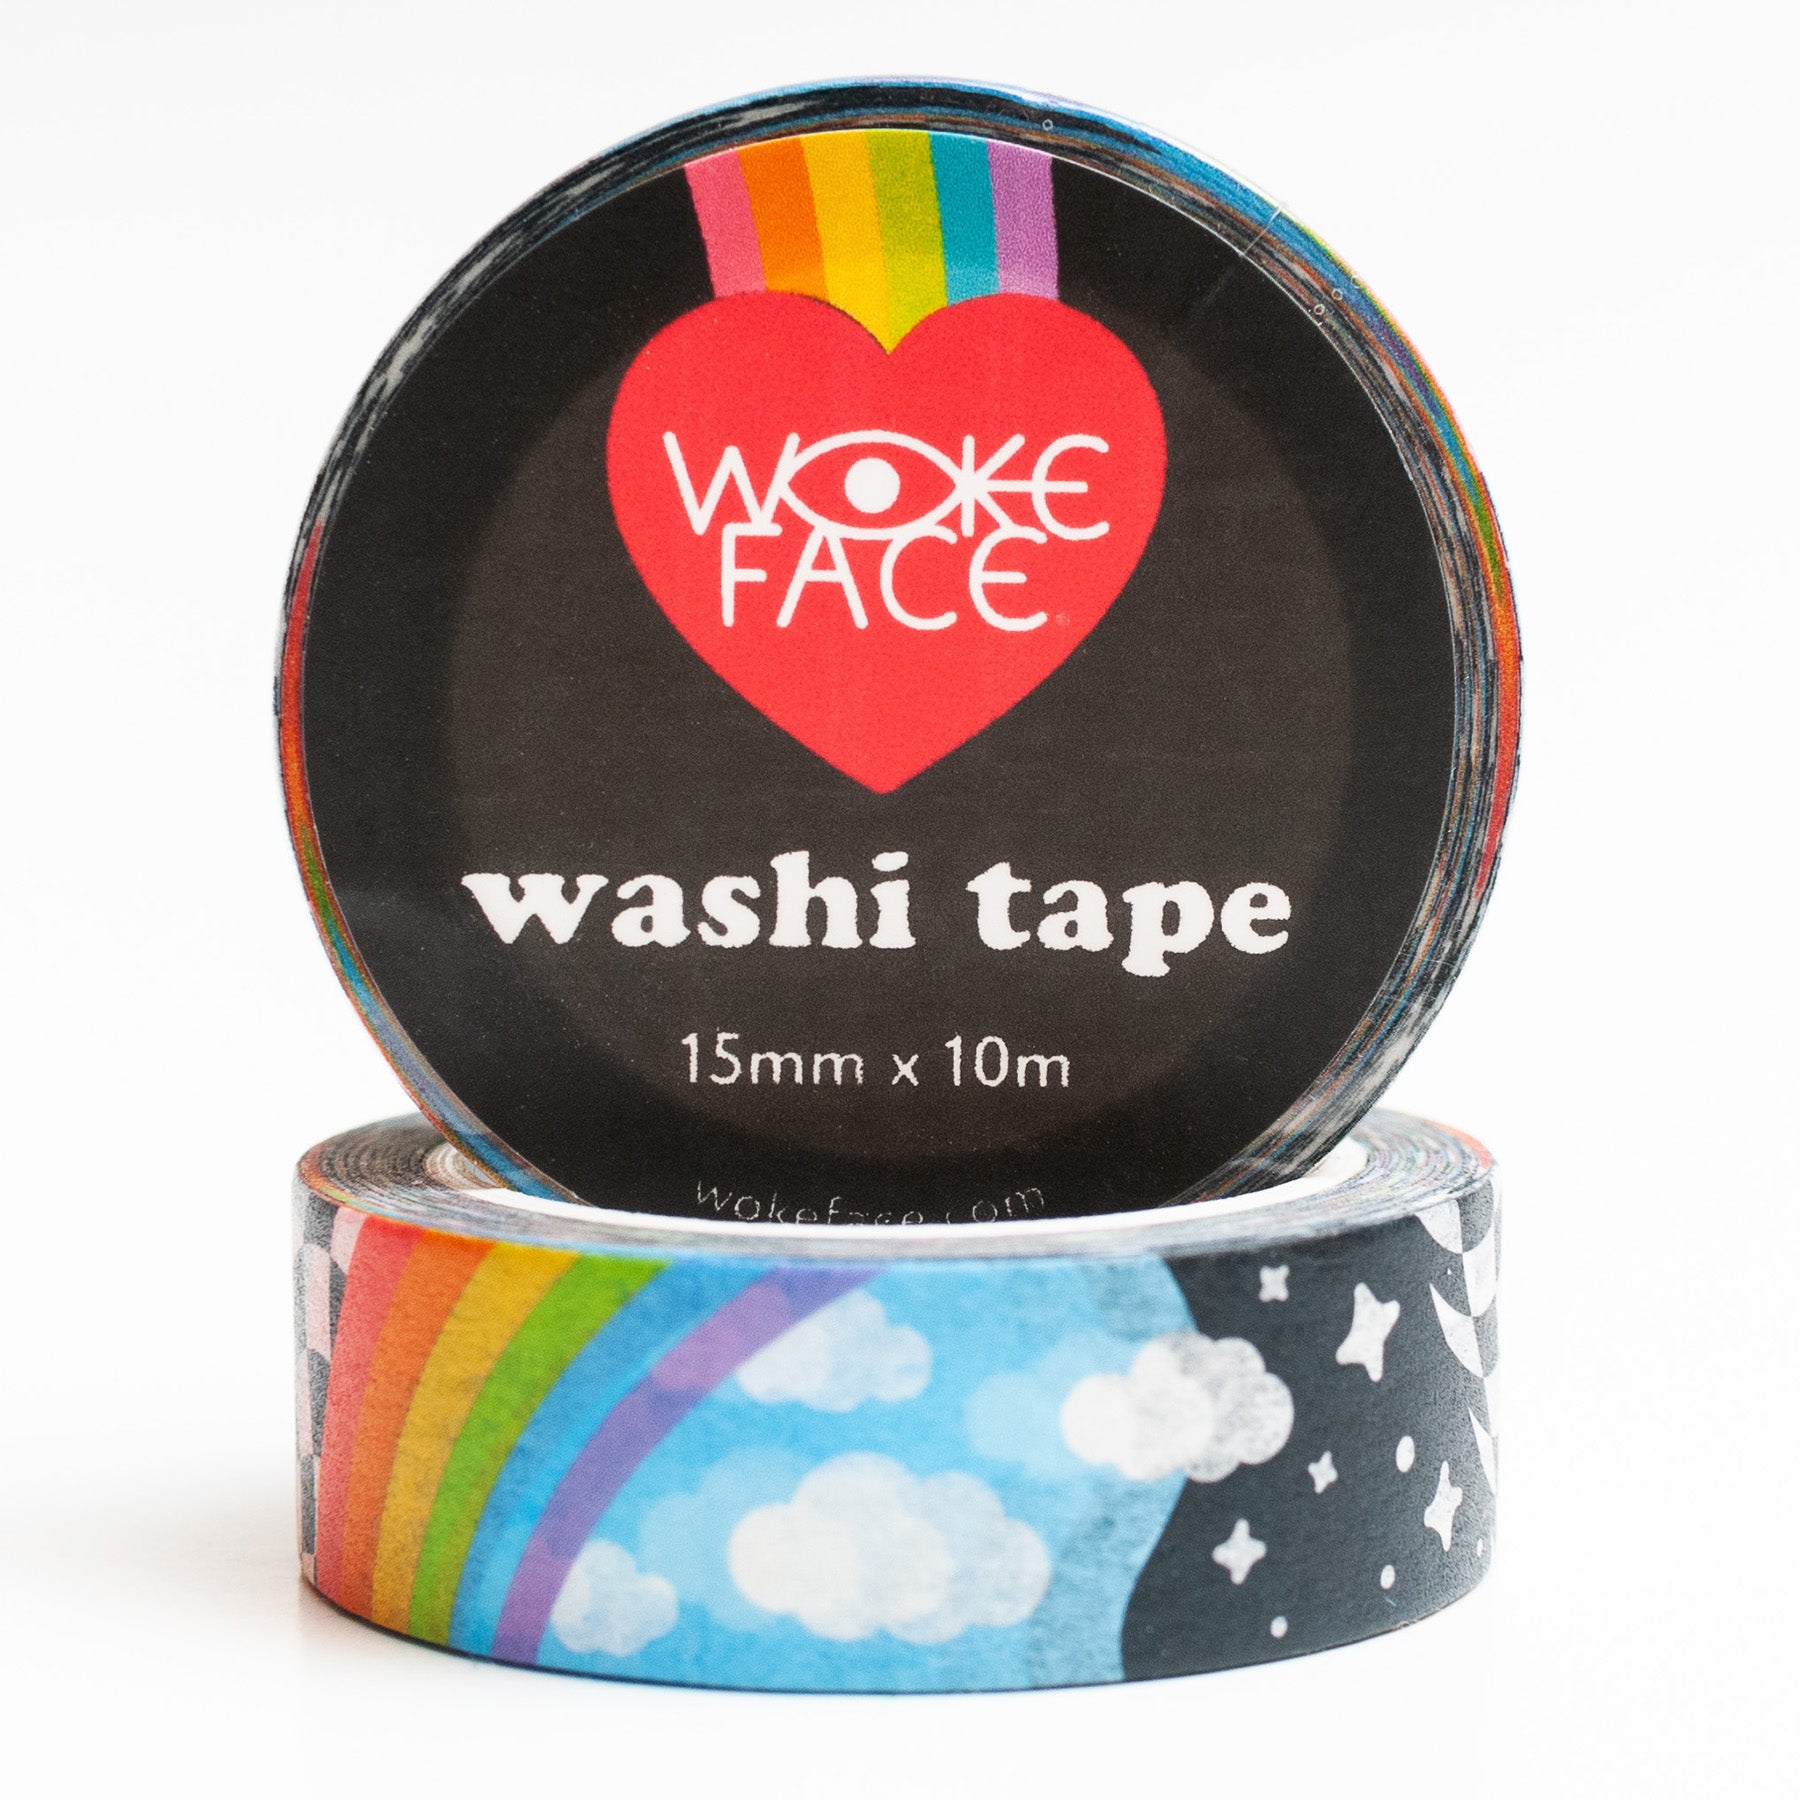 What is Washi tape? – PeggyBack